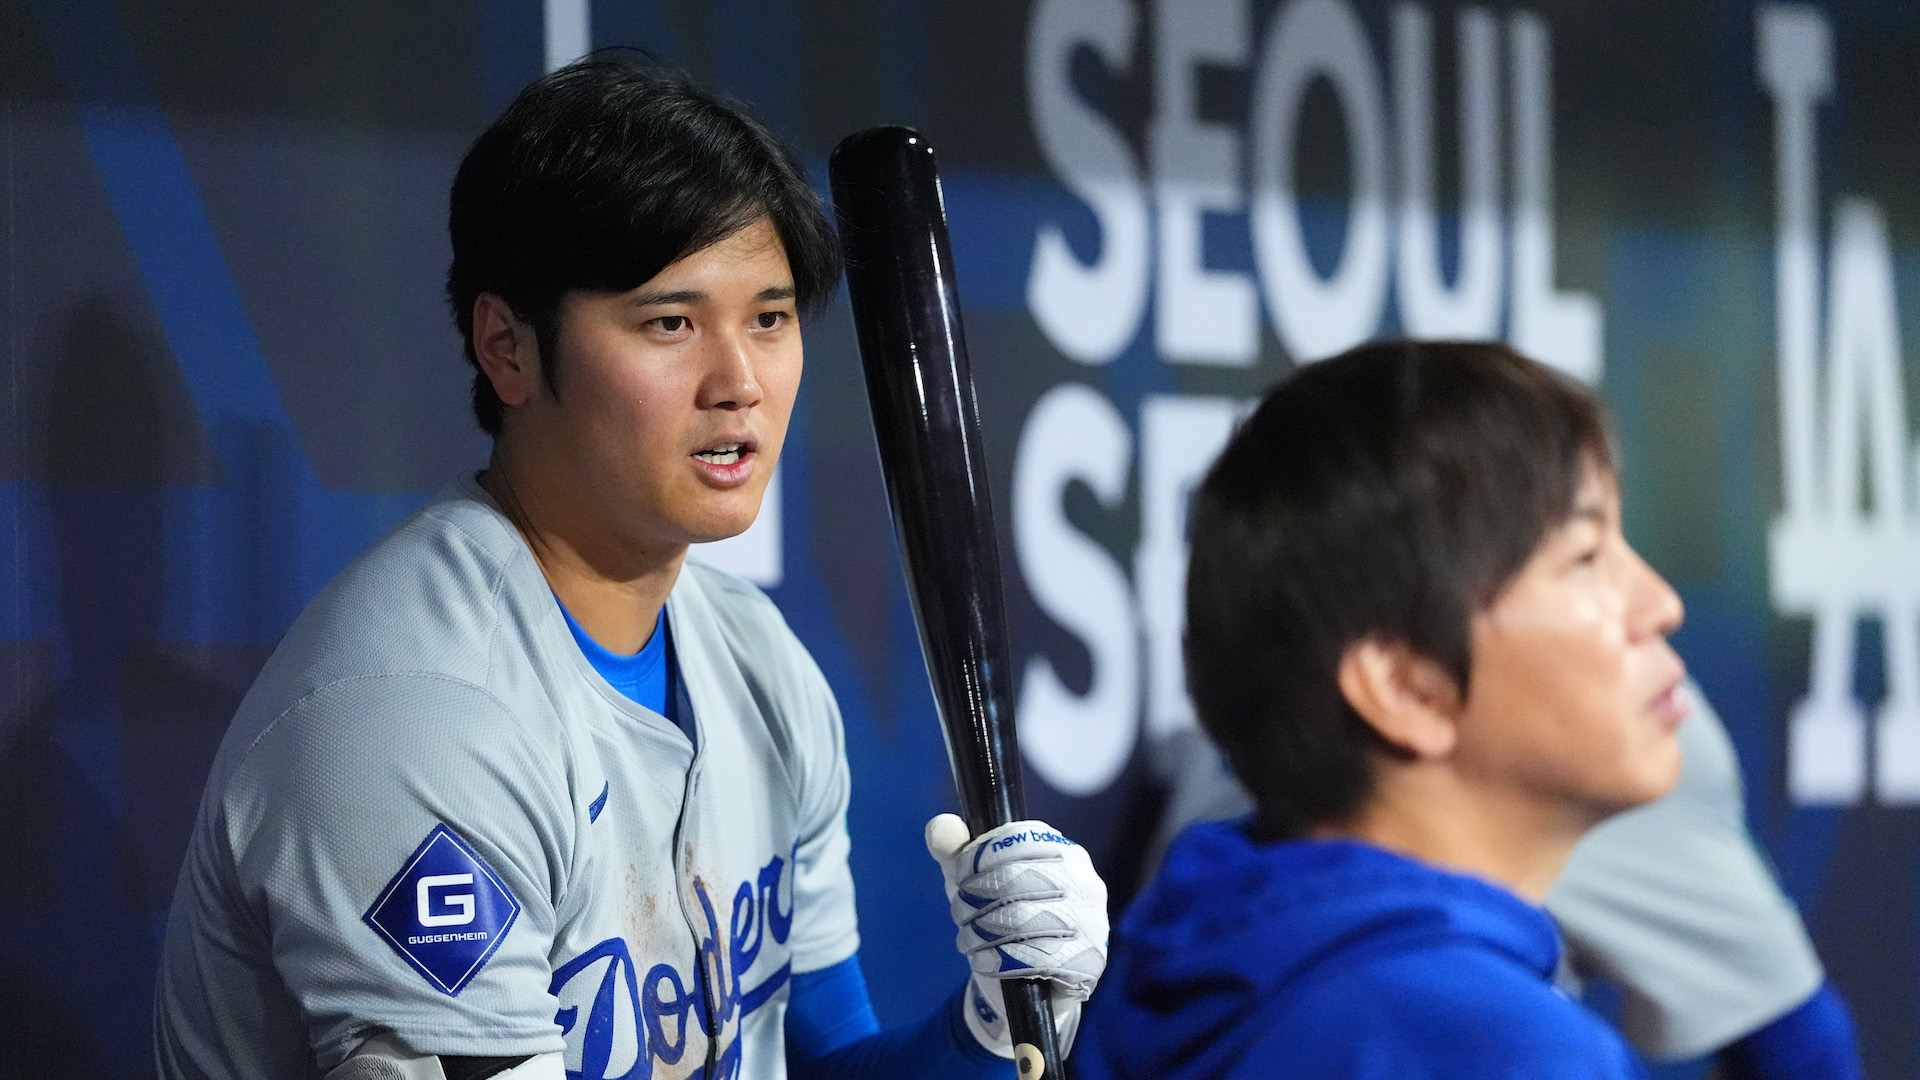 Shohei Ohtani #17 of the Los Angeles Dodgers talks to his interpreter Ippei Mizuhara in the dugout during the 2024 Seoul Series game between Los Angeles Dodgers and San Diego Padres.